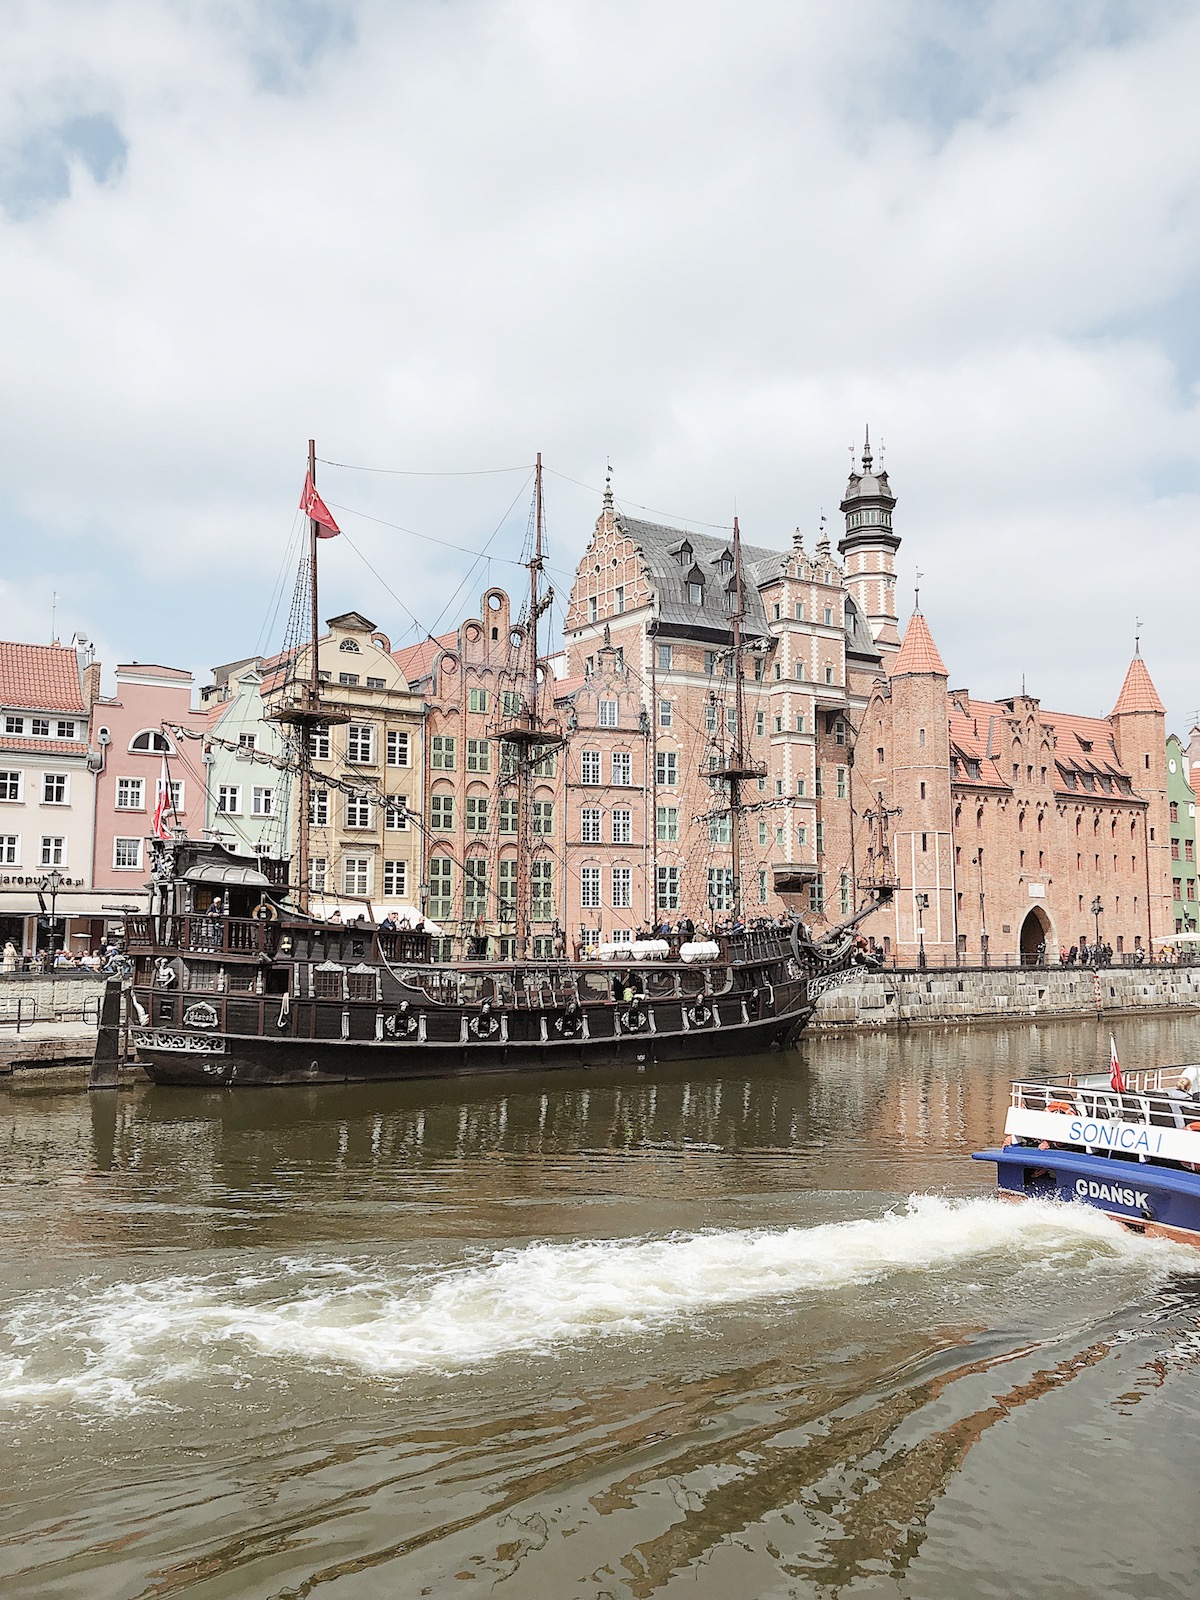 Gdansk is one of the most beautiful cities in Poland and has some great restaurants! Photo by Zofia Cudny